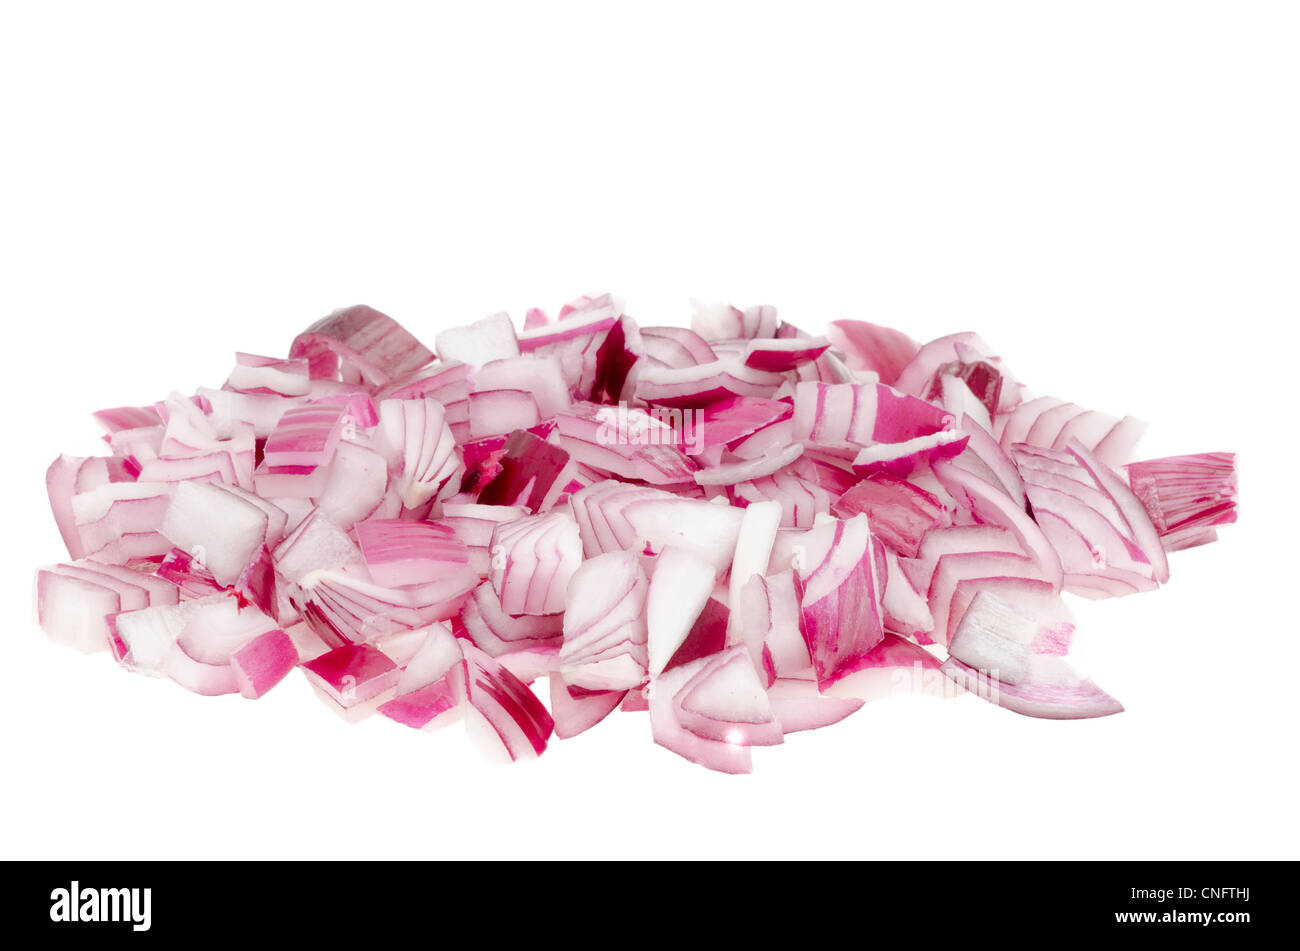 Close-up of diced or chopped red onion - shallow depth of field Stock Photo